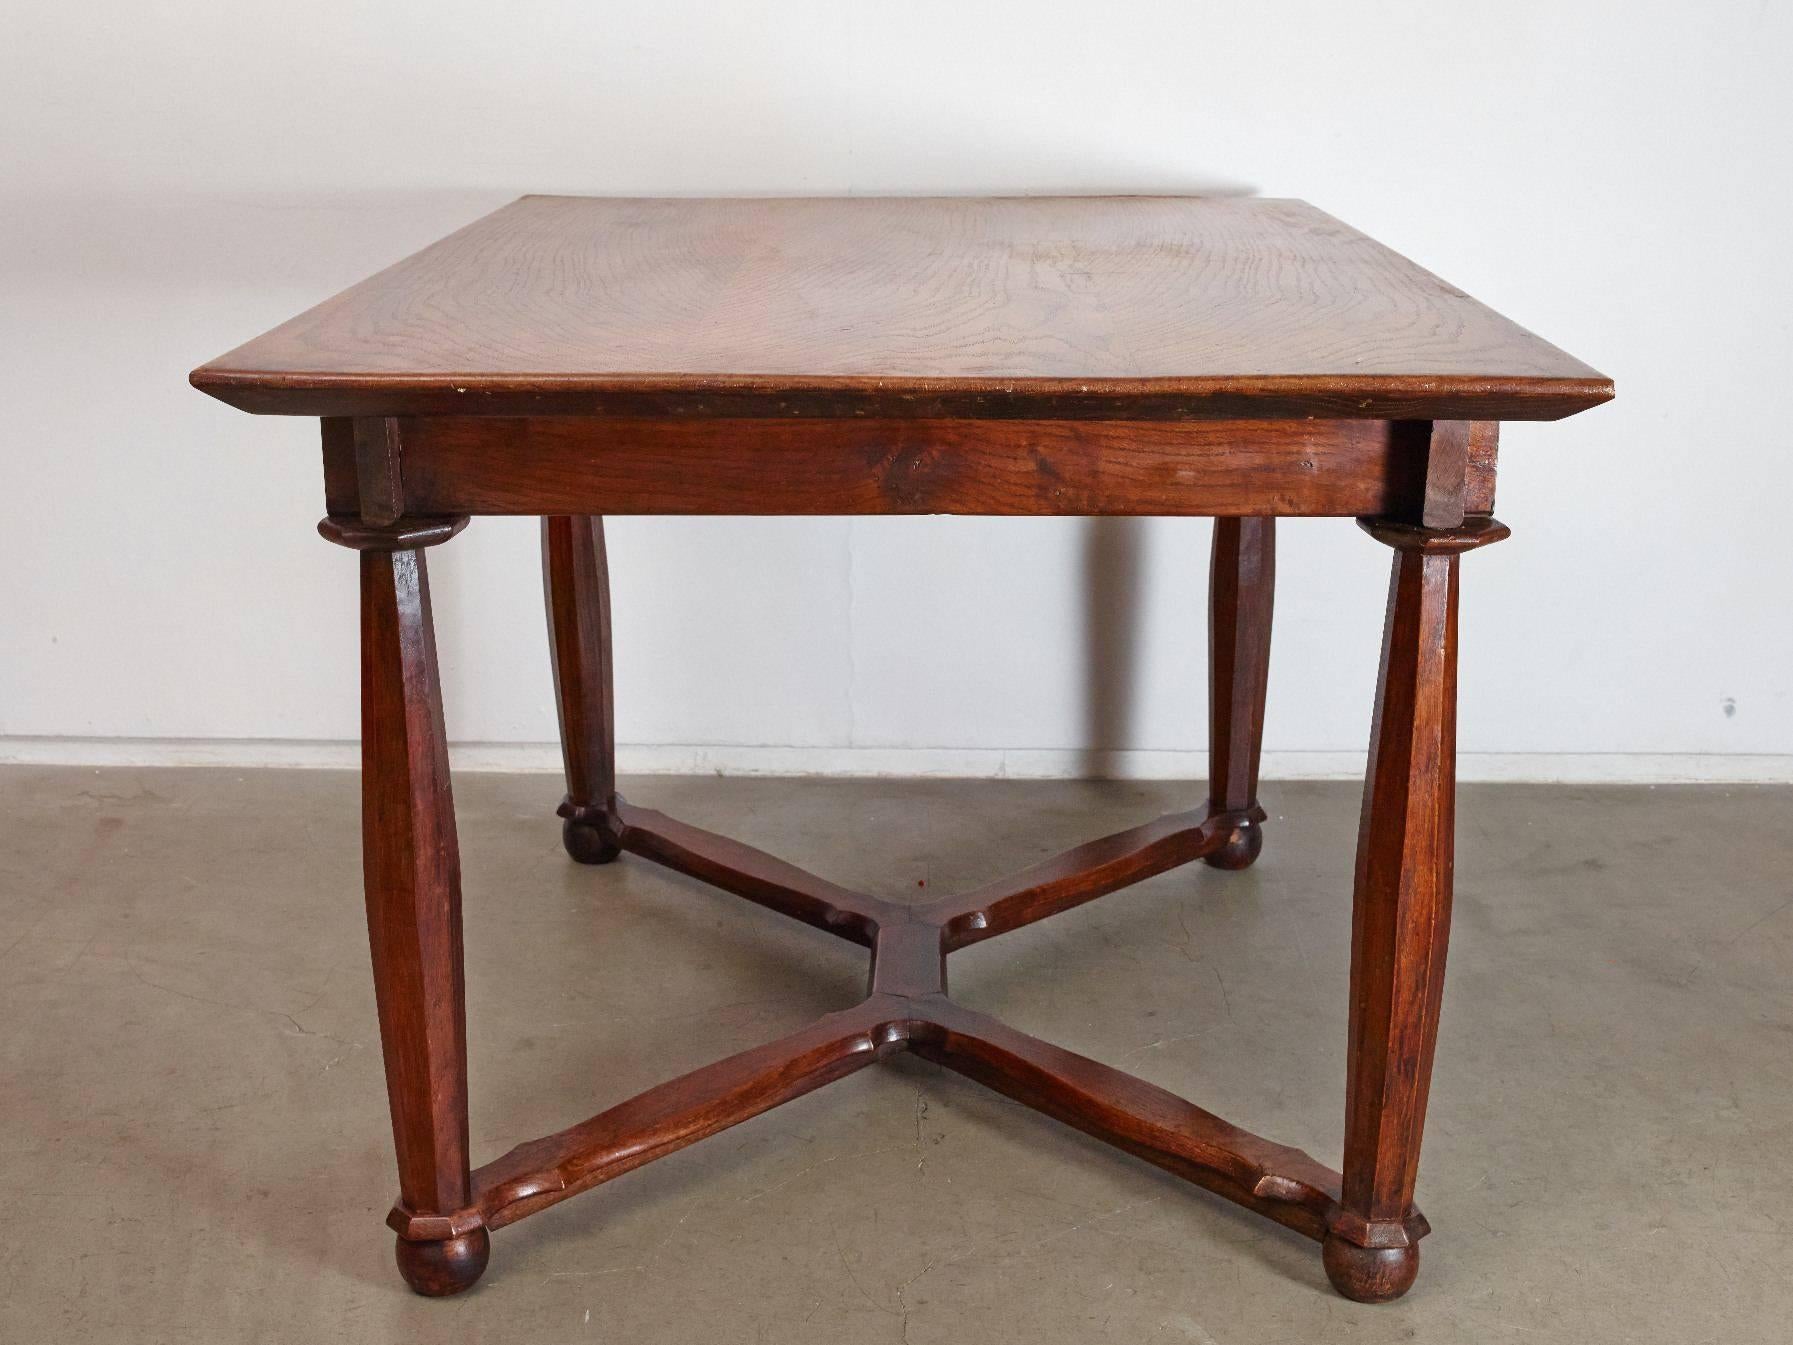 This rustic oak table was once the hall table to an English Chief Justice, according to the previous owner who found it in his Estate. It came from the Arts & Crafts era with elegant wood-turning work and stretchers joining each ball foot,